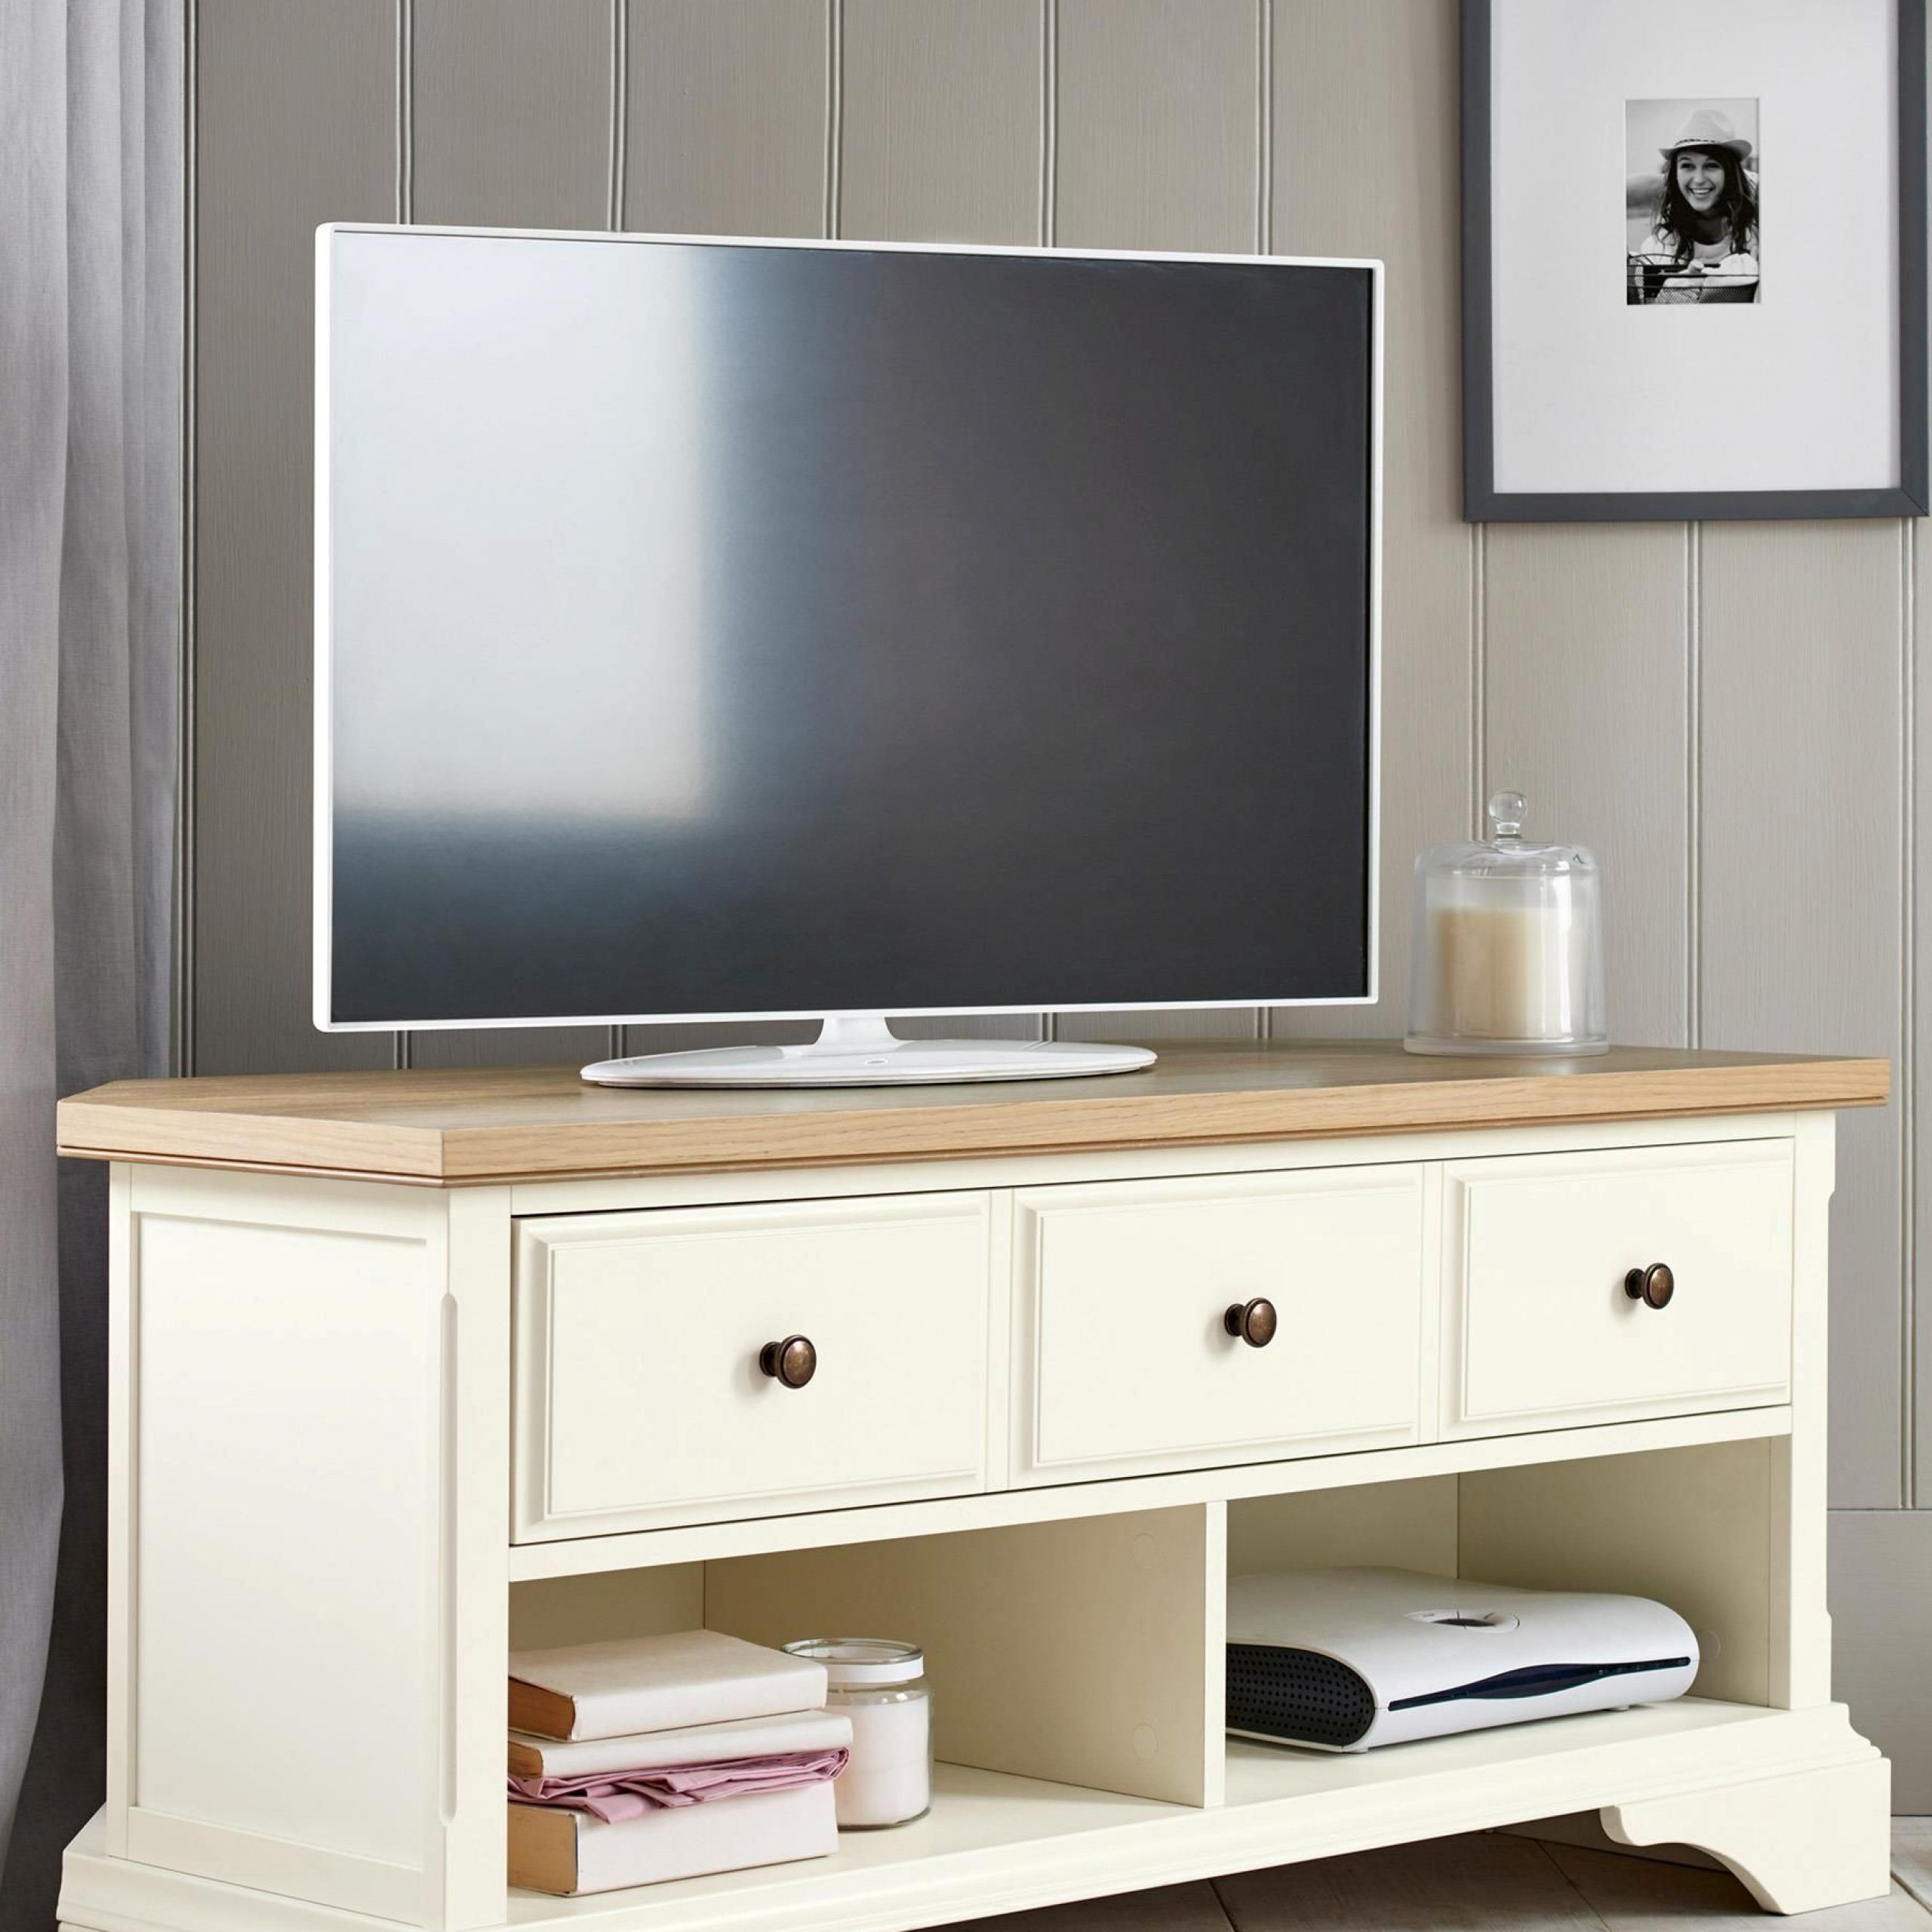 Buy Bordeaux Corner Tv Unit From The Next Uk Online Shop With Cotswold Cream Tv Stands (View 12 of 20)